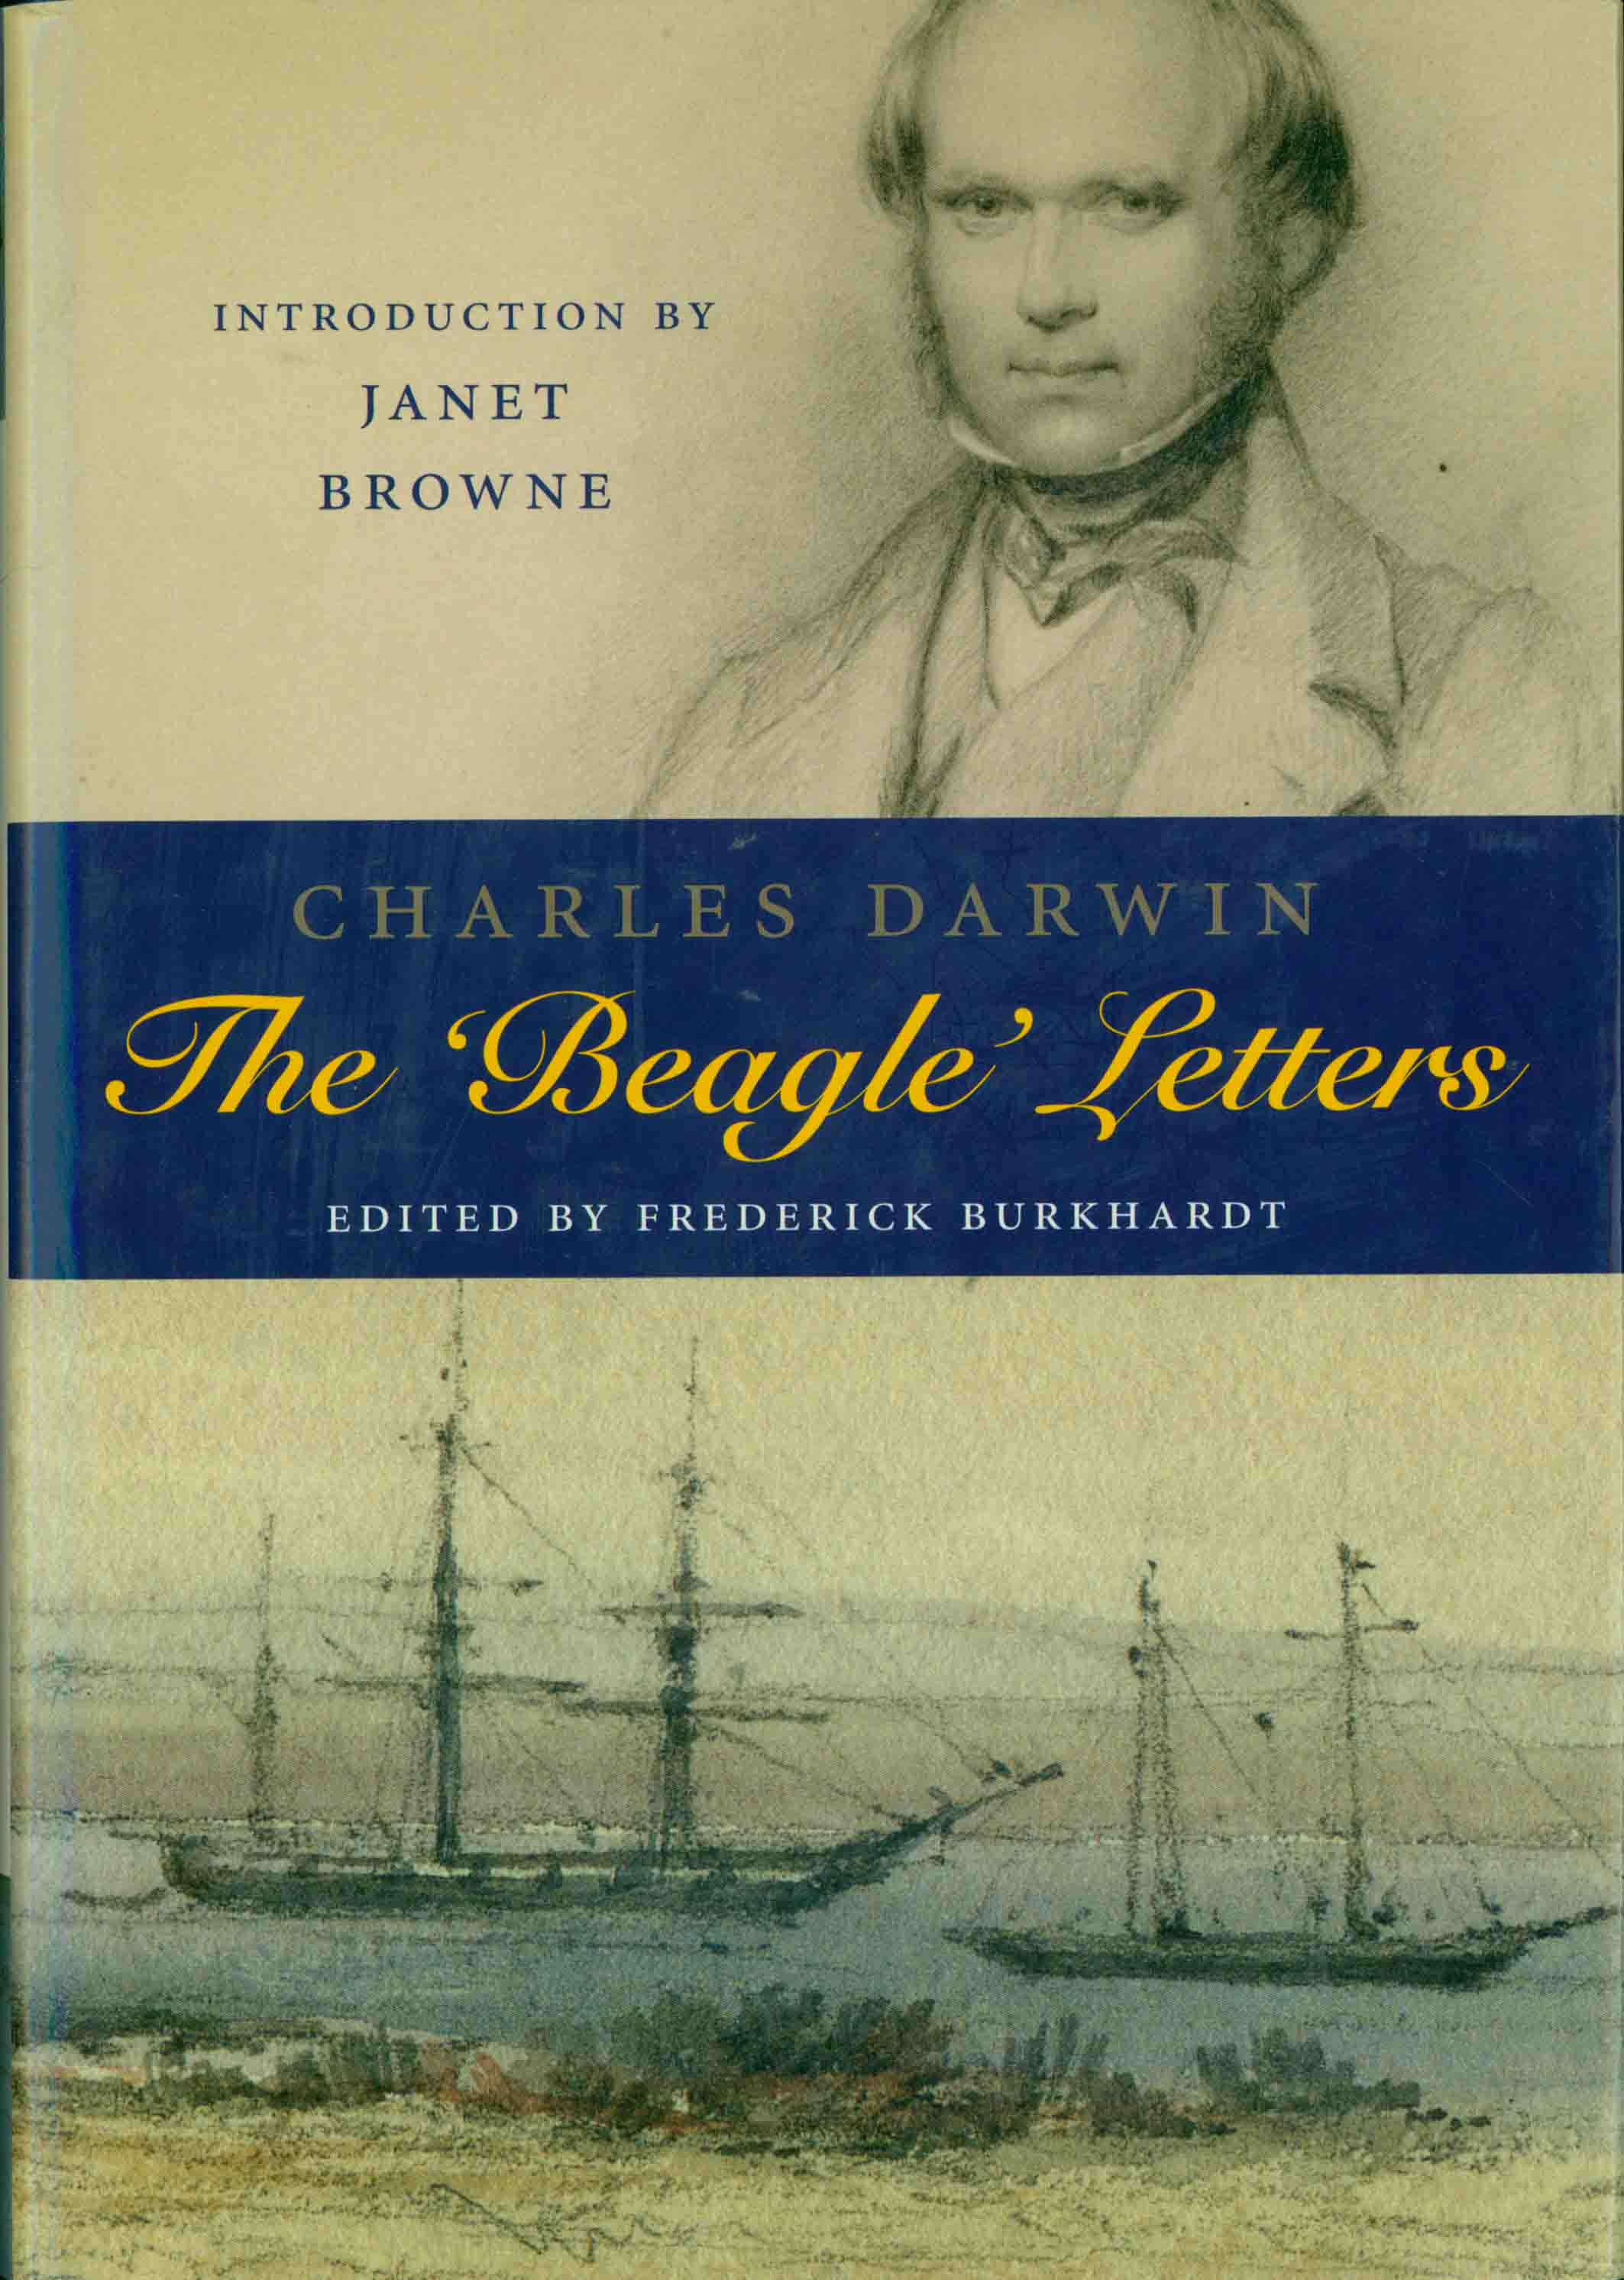 CHARLES DARWIN THE BEAGLE LETTERS.